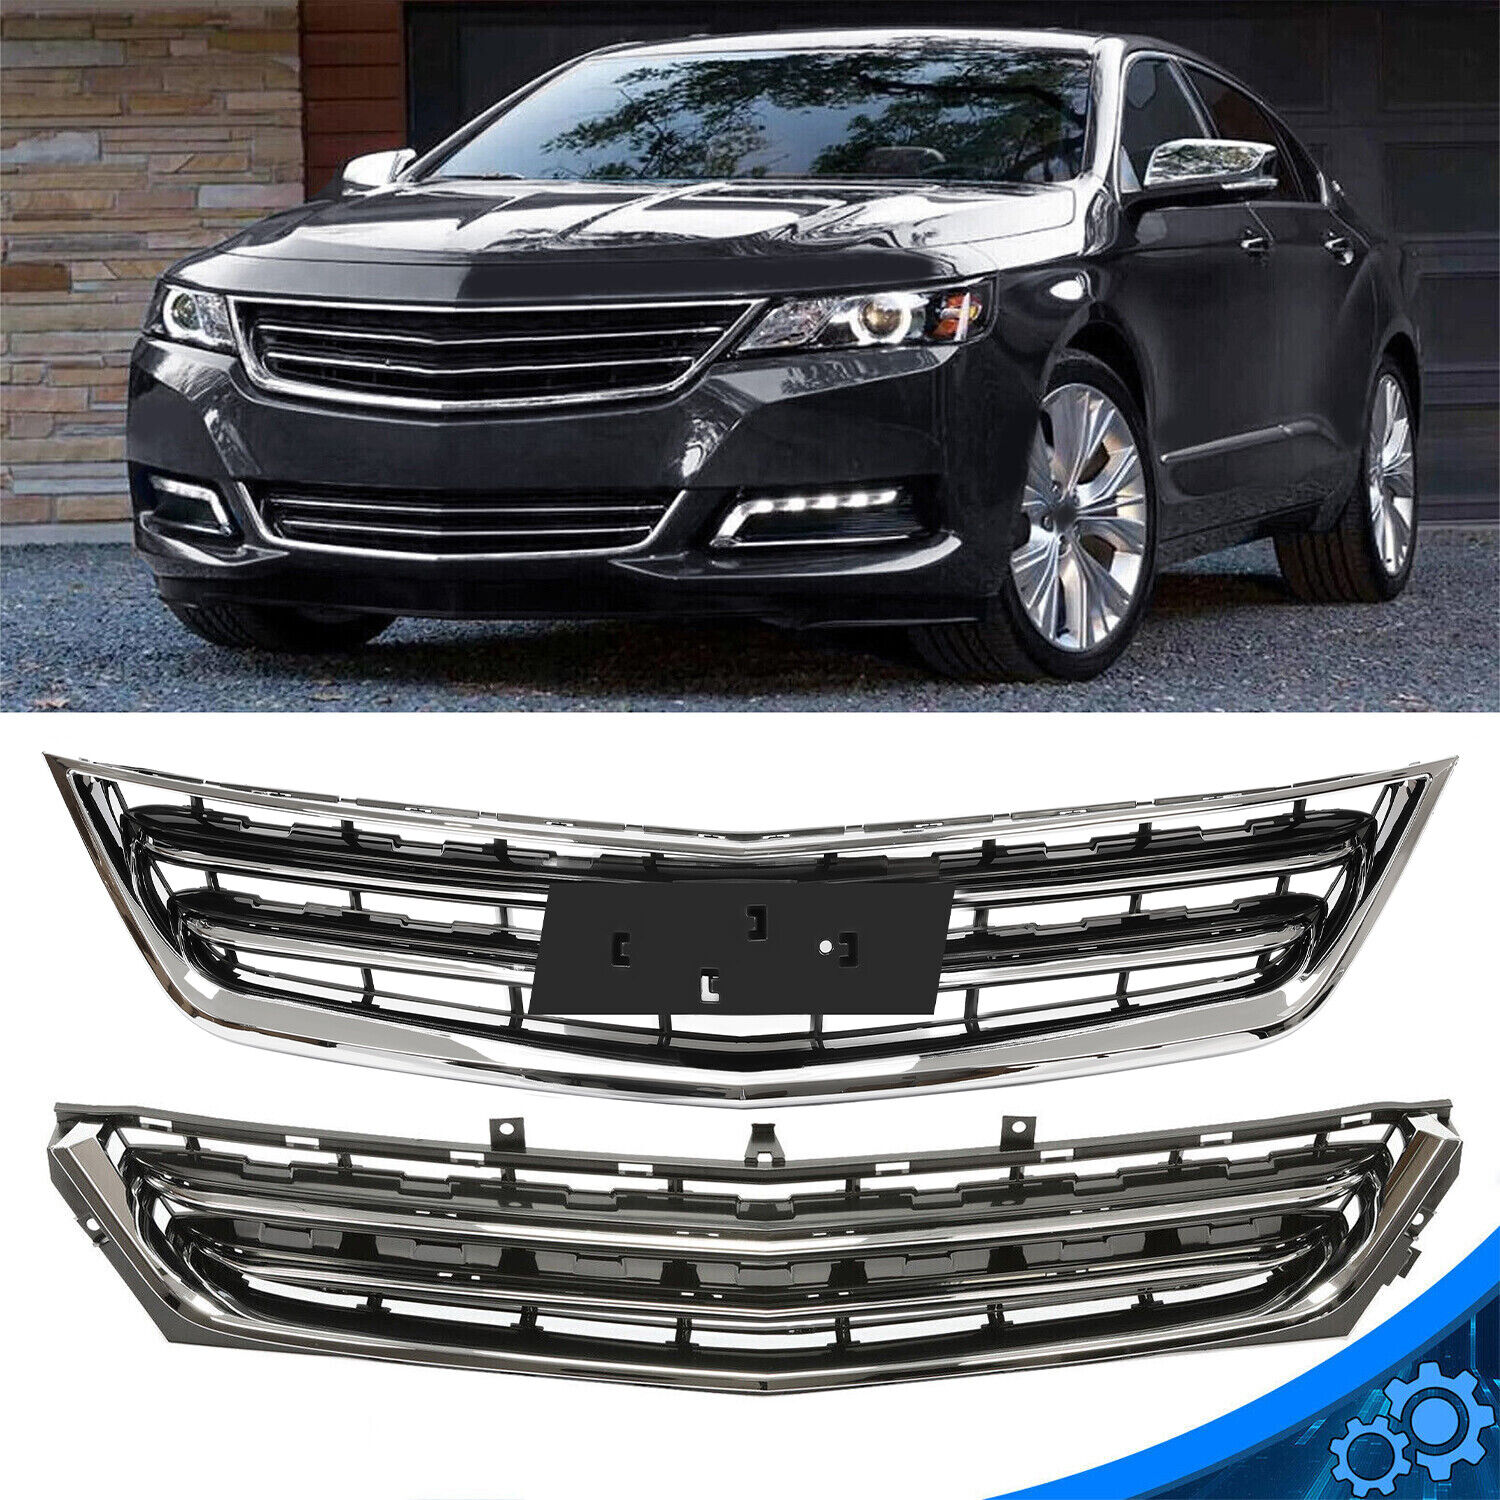 Fit for 2014-2020 Chevrolet Impala Front Upper and Lower Grille Black & Chrome